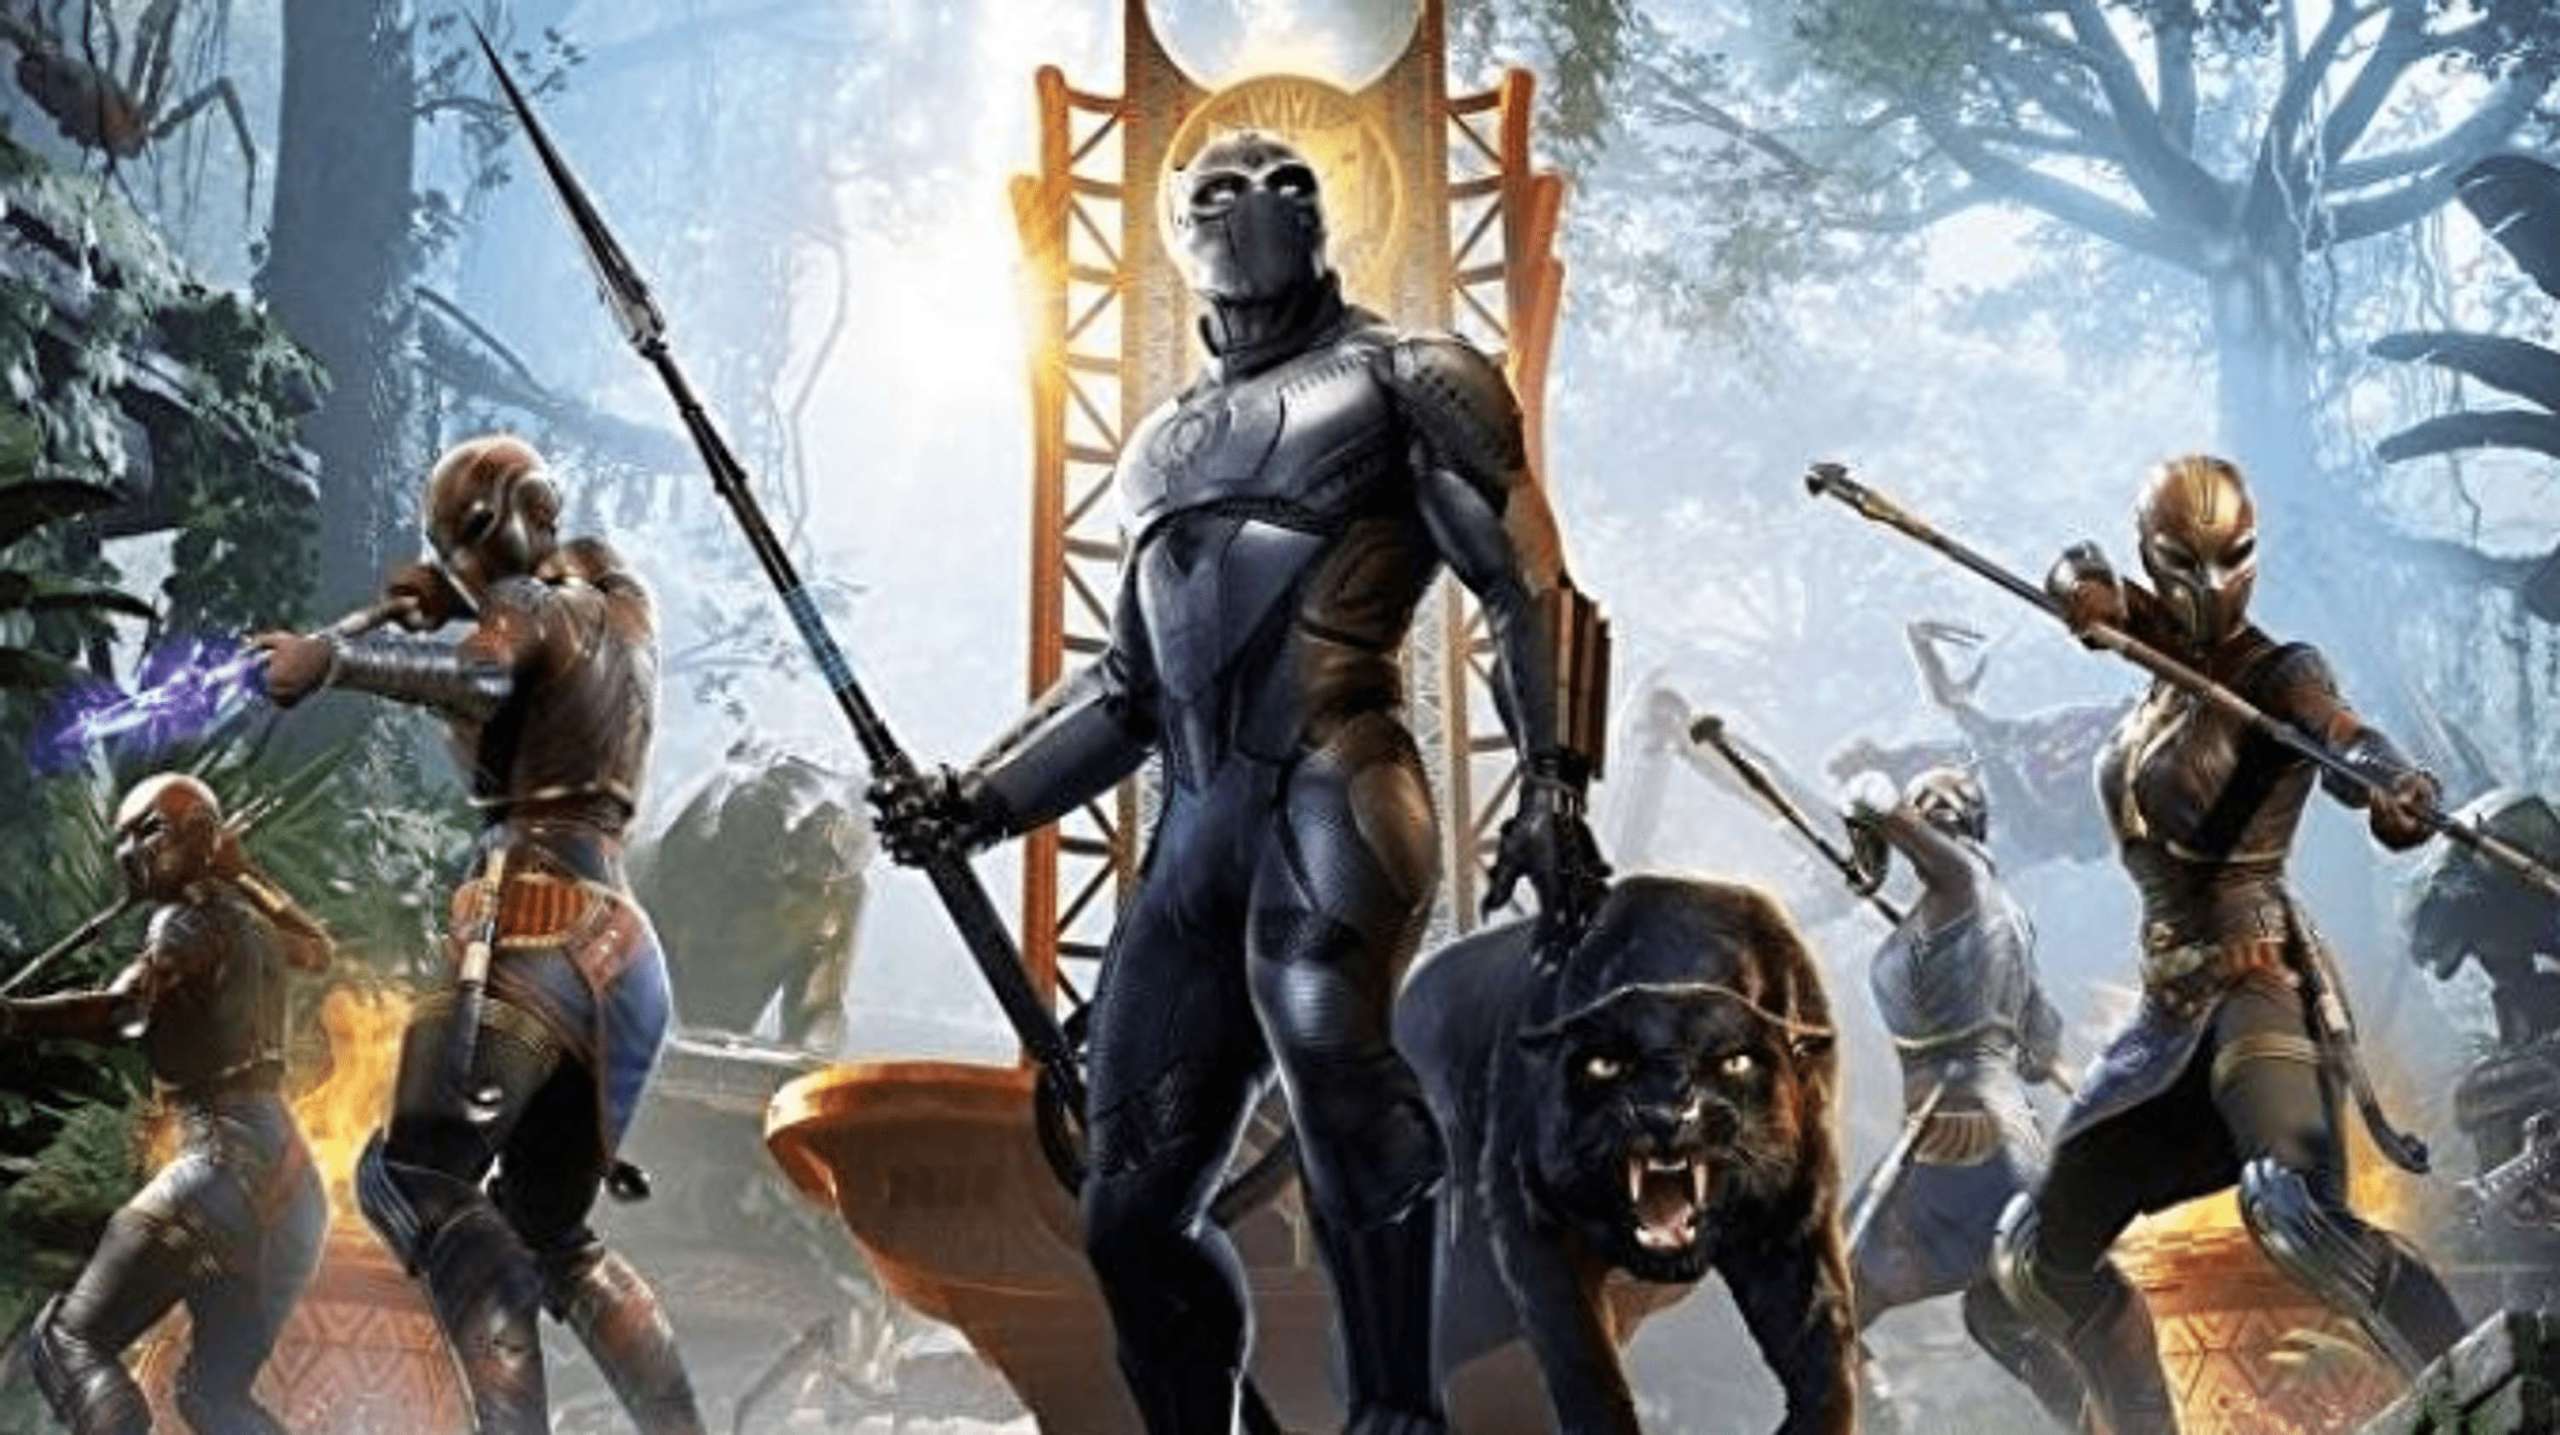 There Are Rumors That A Black Panther Open-World Game Is Being Created